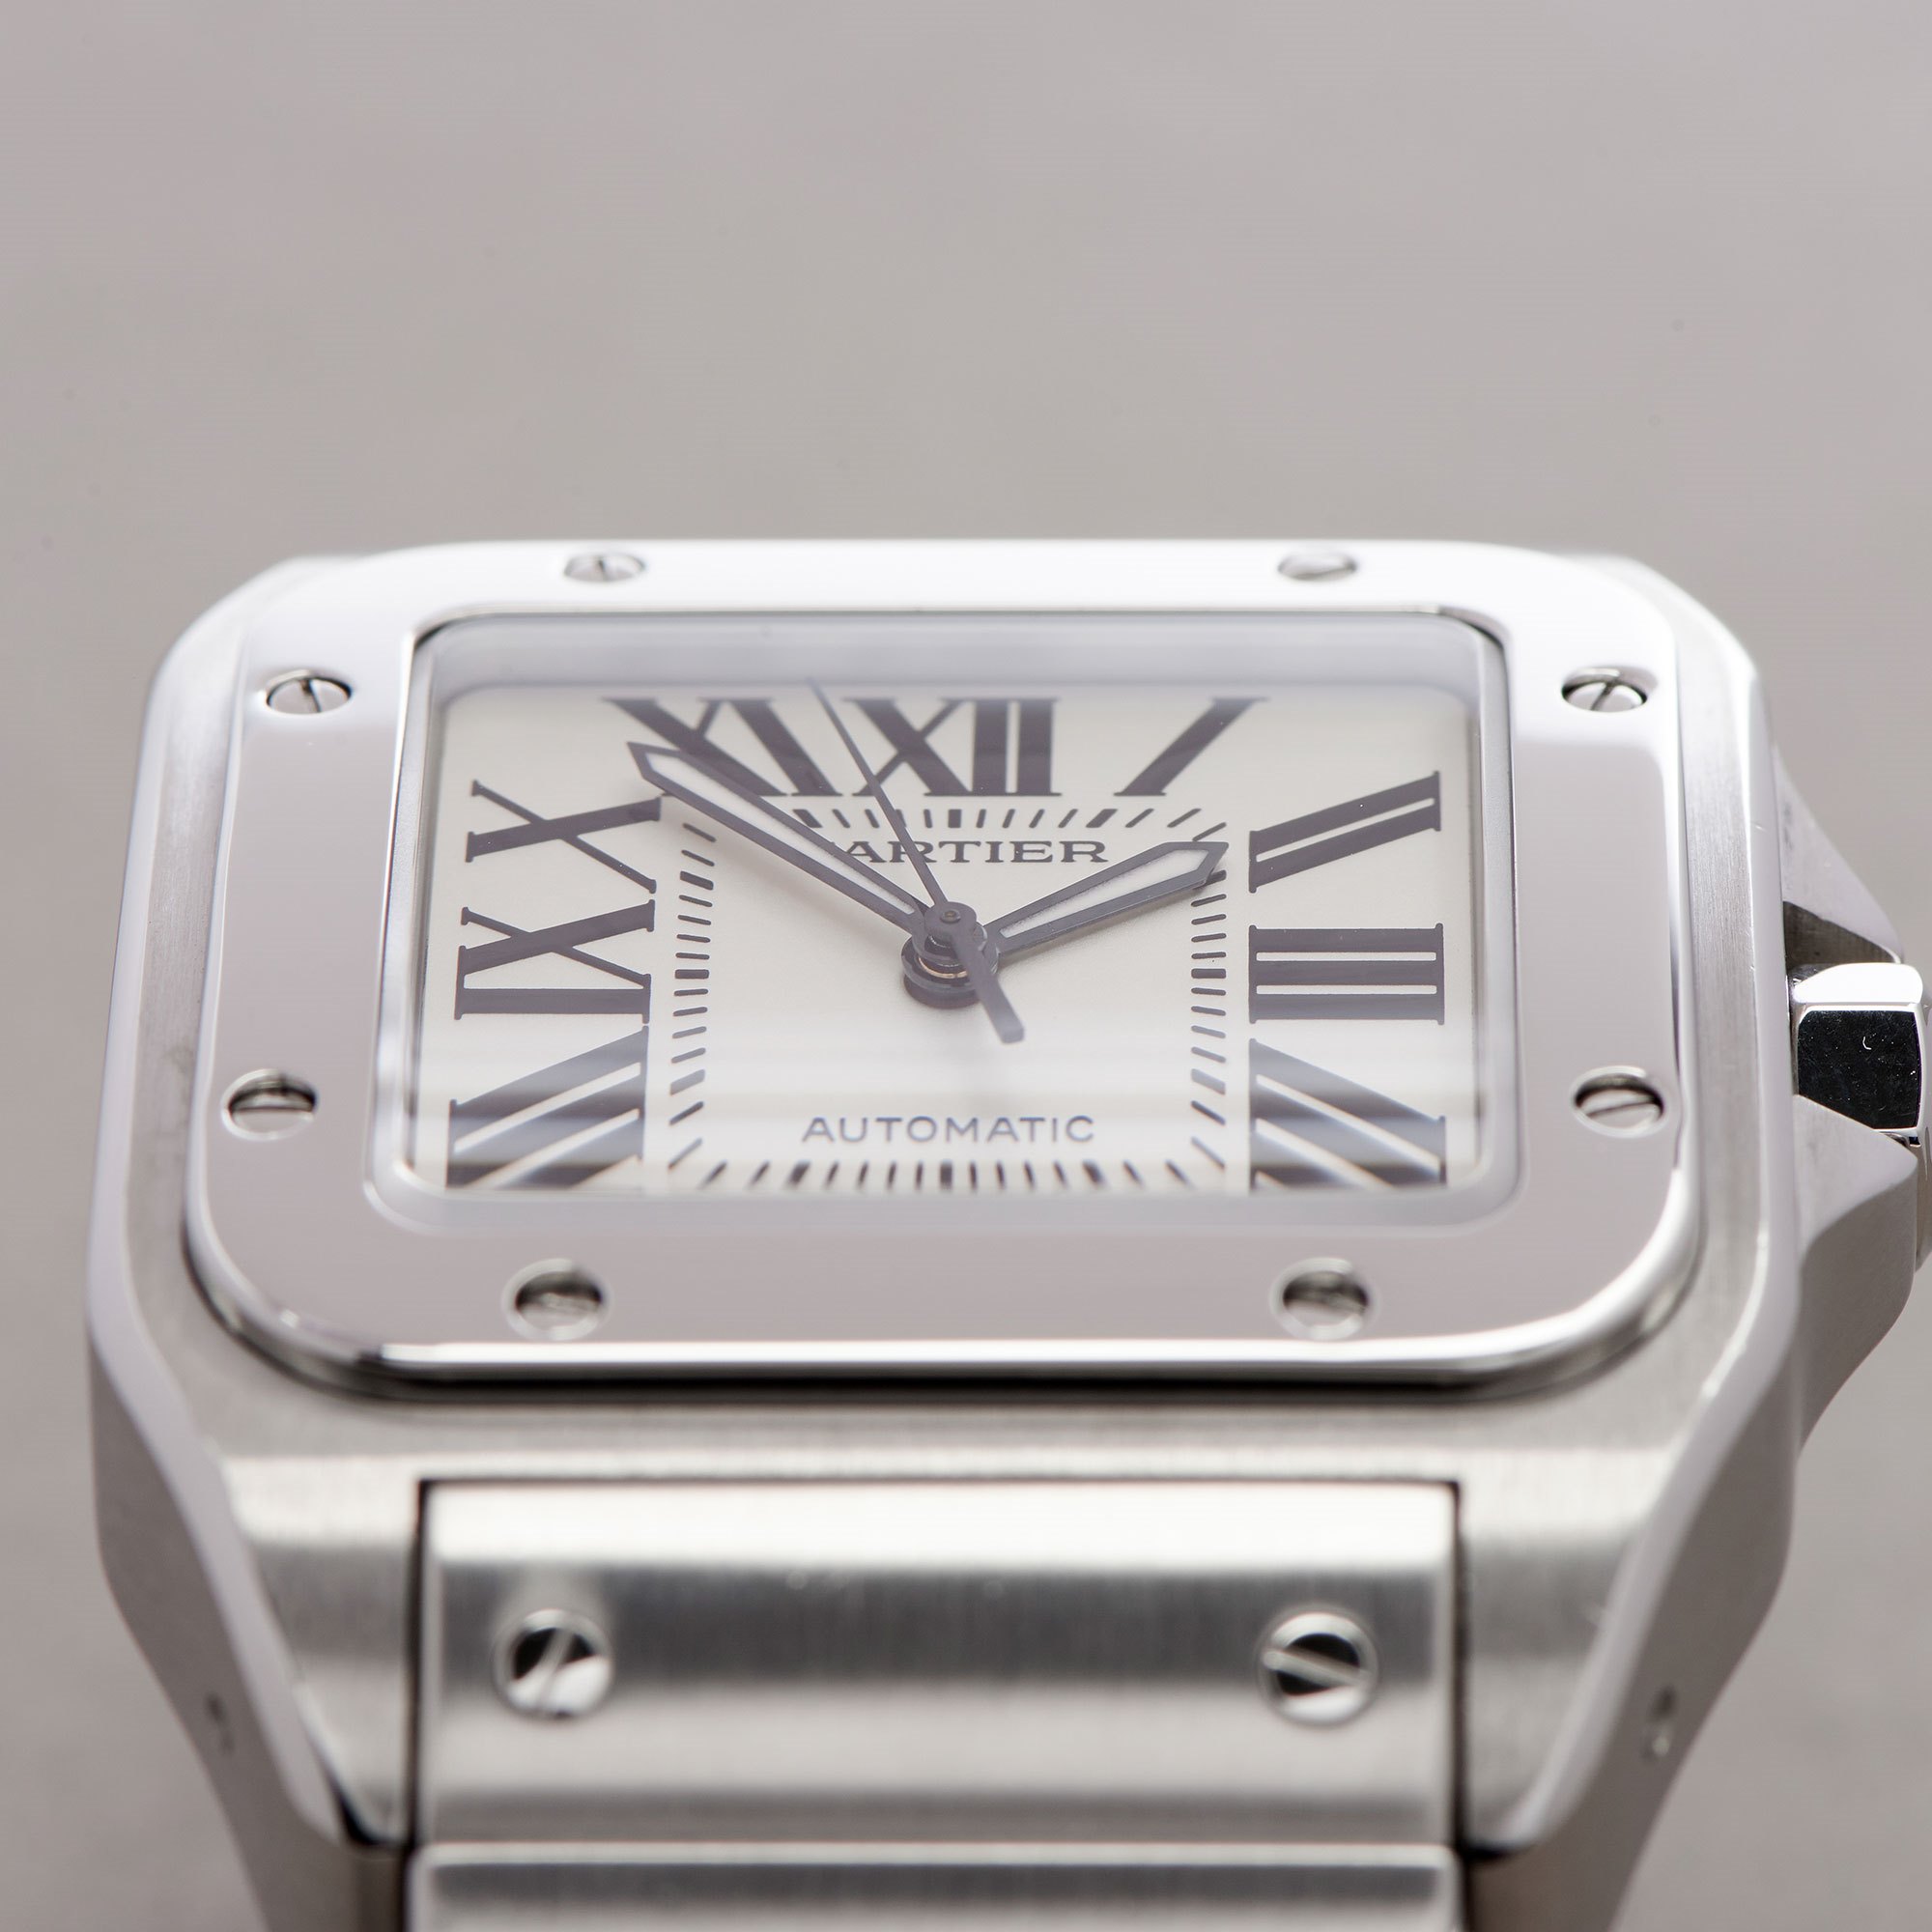 Cartier Santos 100 XL Automatic Stainless Steel W200737G or 2656